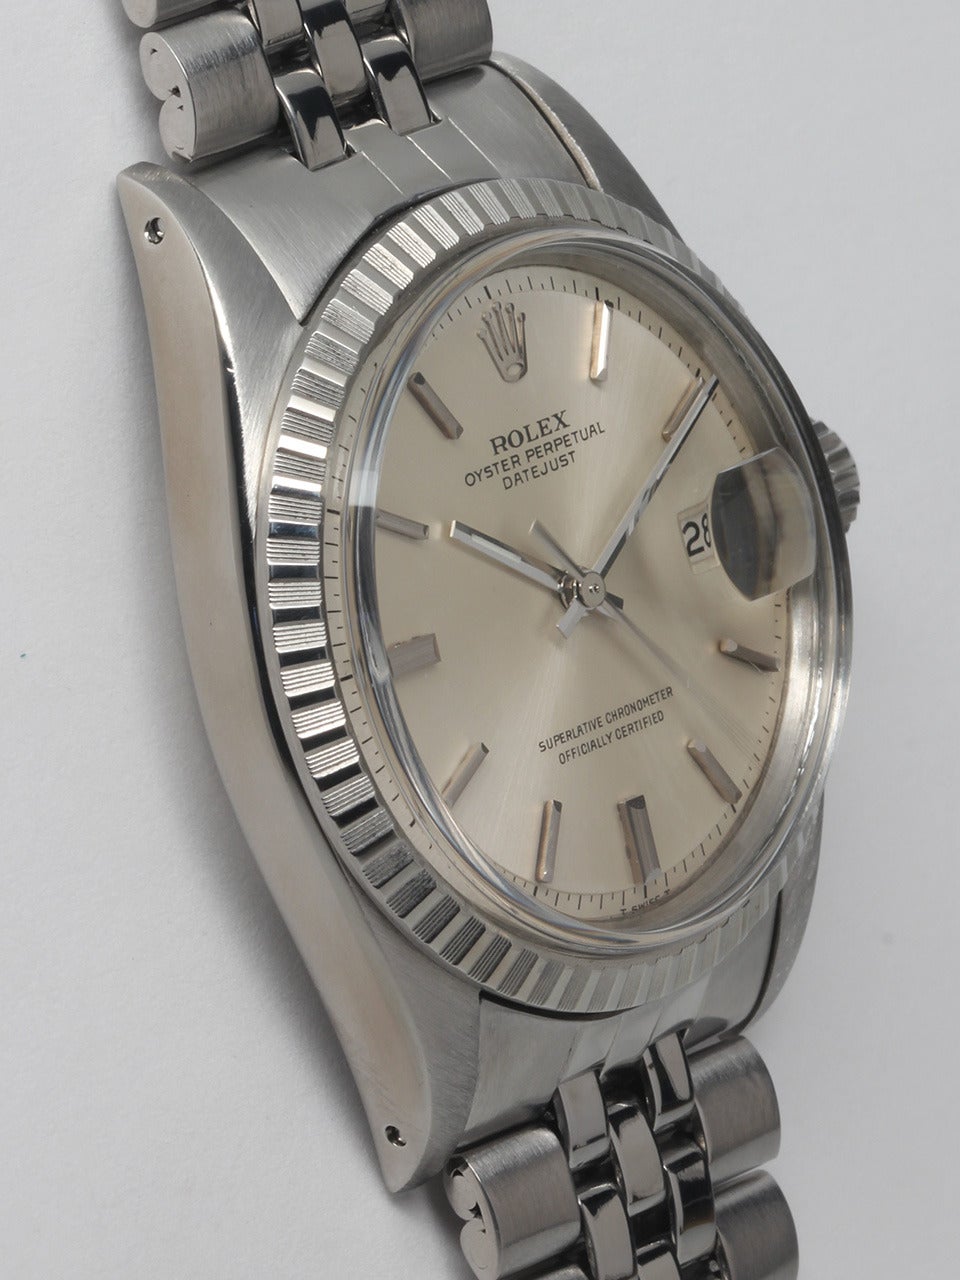 Rolex Stainless Steel Datejust Wristwatch ref 1601 serial #2.1 million circa 1969. 36mm diameter case with engine turned bezel and acrylic crystal. Original silvered satin pie pan dial with applied silver indexes and hands. Powered by self winding